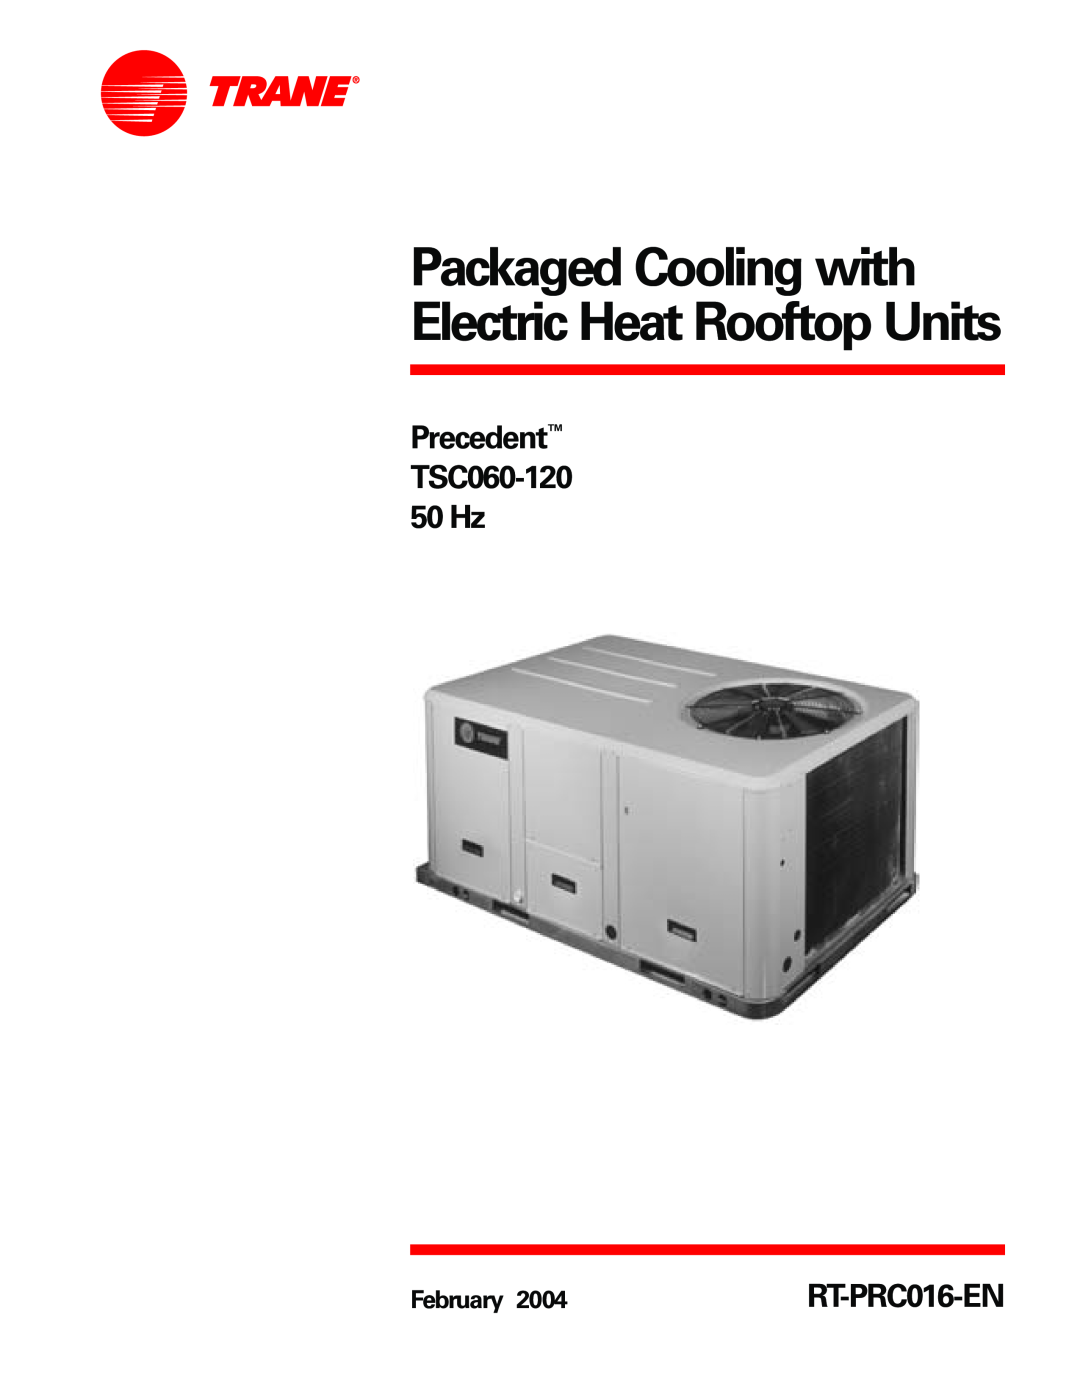 Trane manual Packaged Cooling with Electric Heat Rooftop Units, Precedent TSC060-120 50 Hz, RT-PRC016-EN, February 